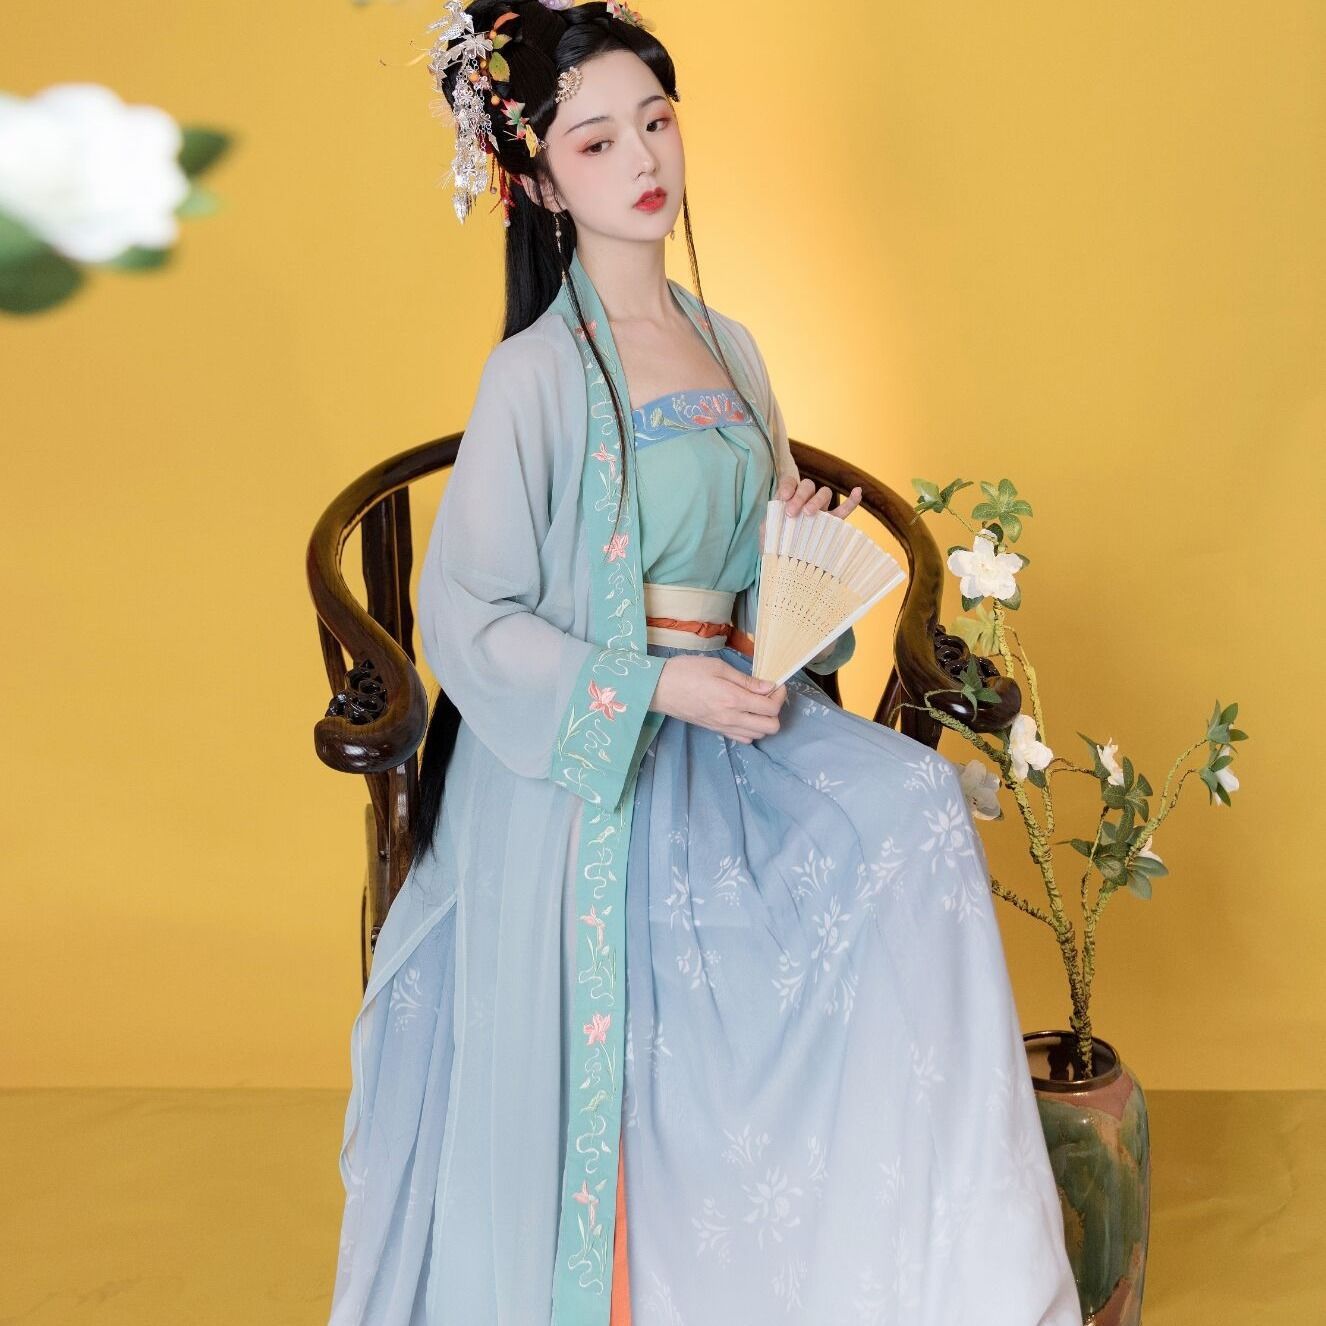 summer new pattern Hanfu adult ancient costume Chinese style Ultra cents heavy industry Embroidery Pieces of old cloth or rags pasted together